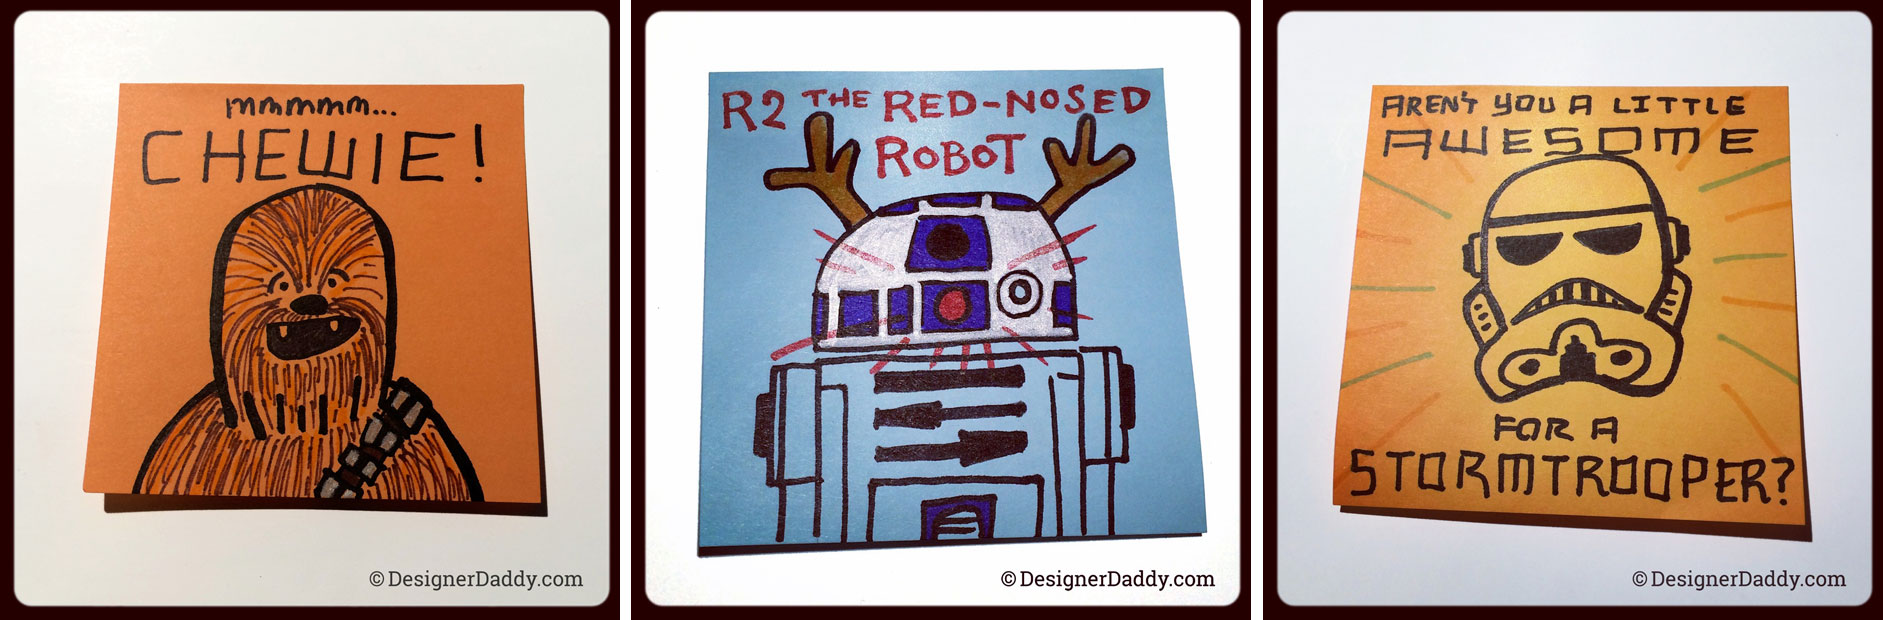 Top 14 SuperLunchNotes of 2014 - Star Wars